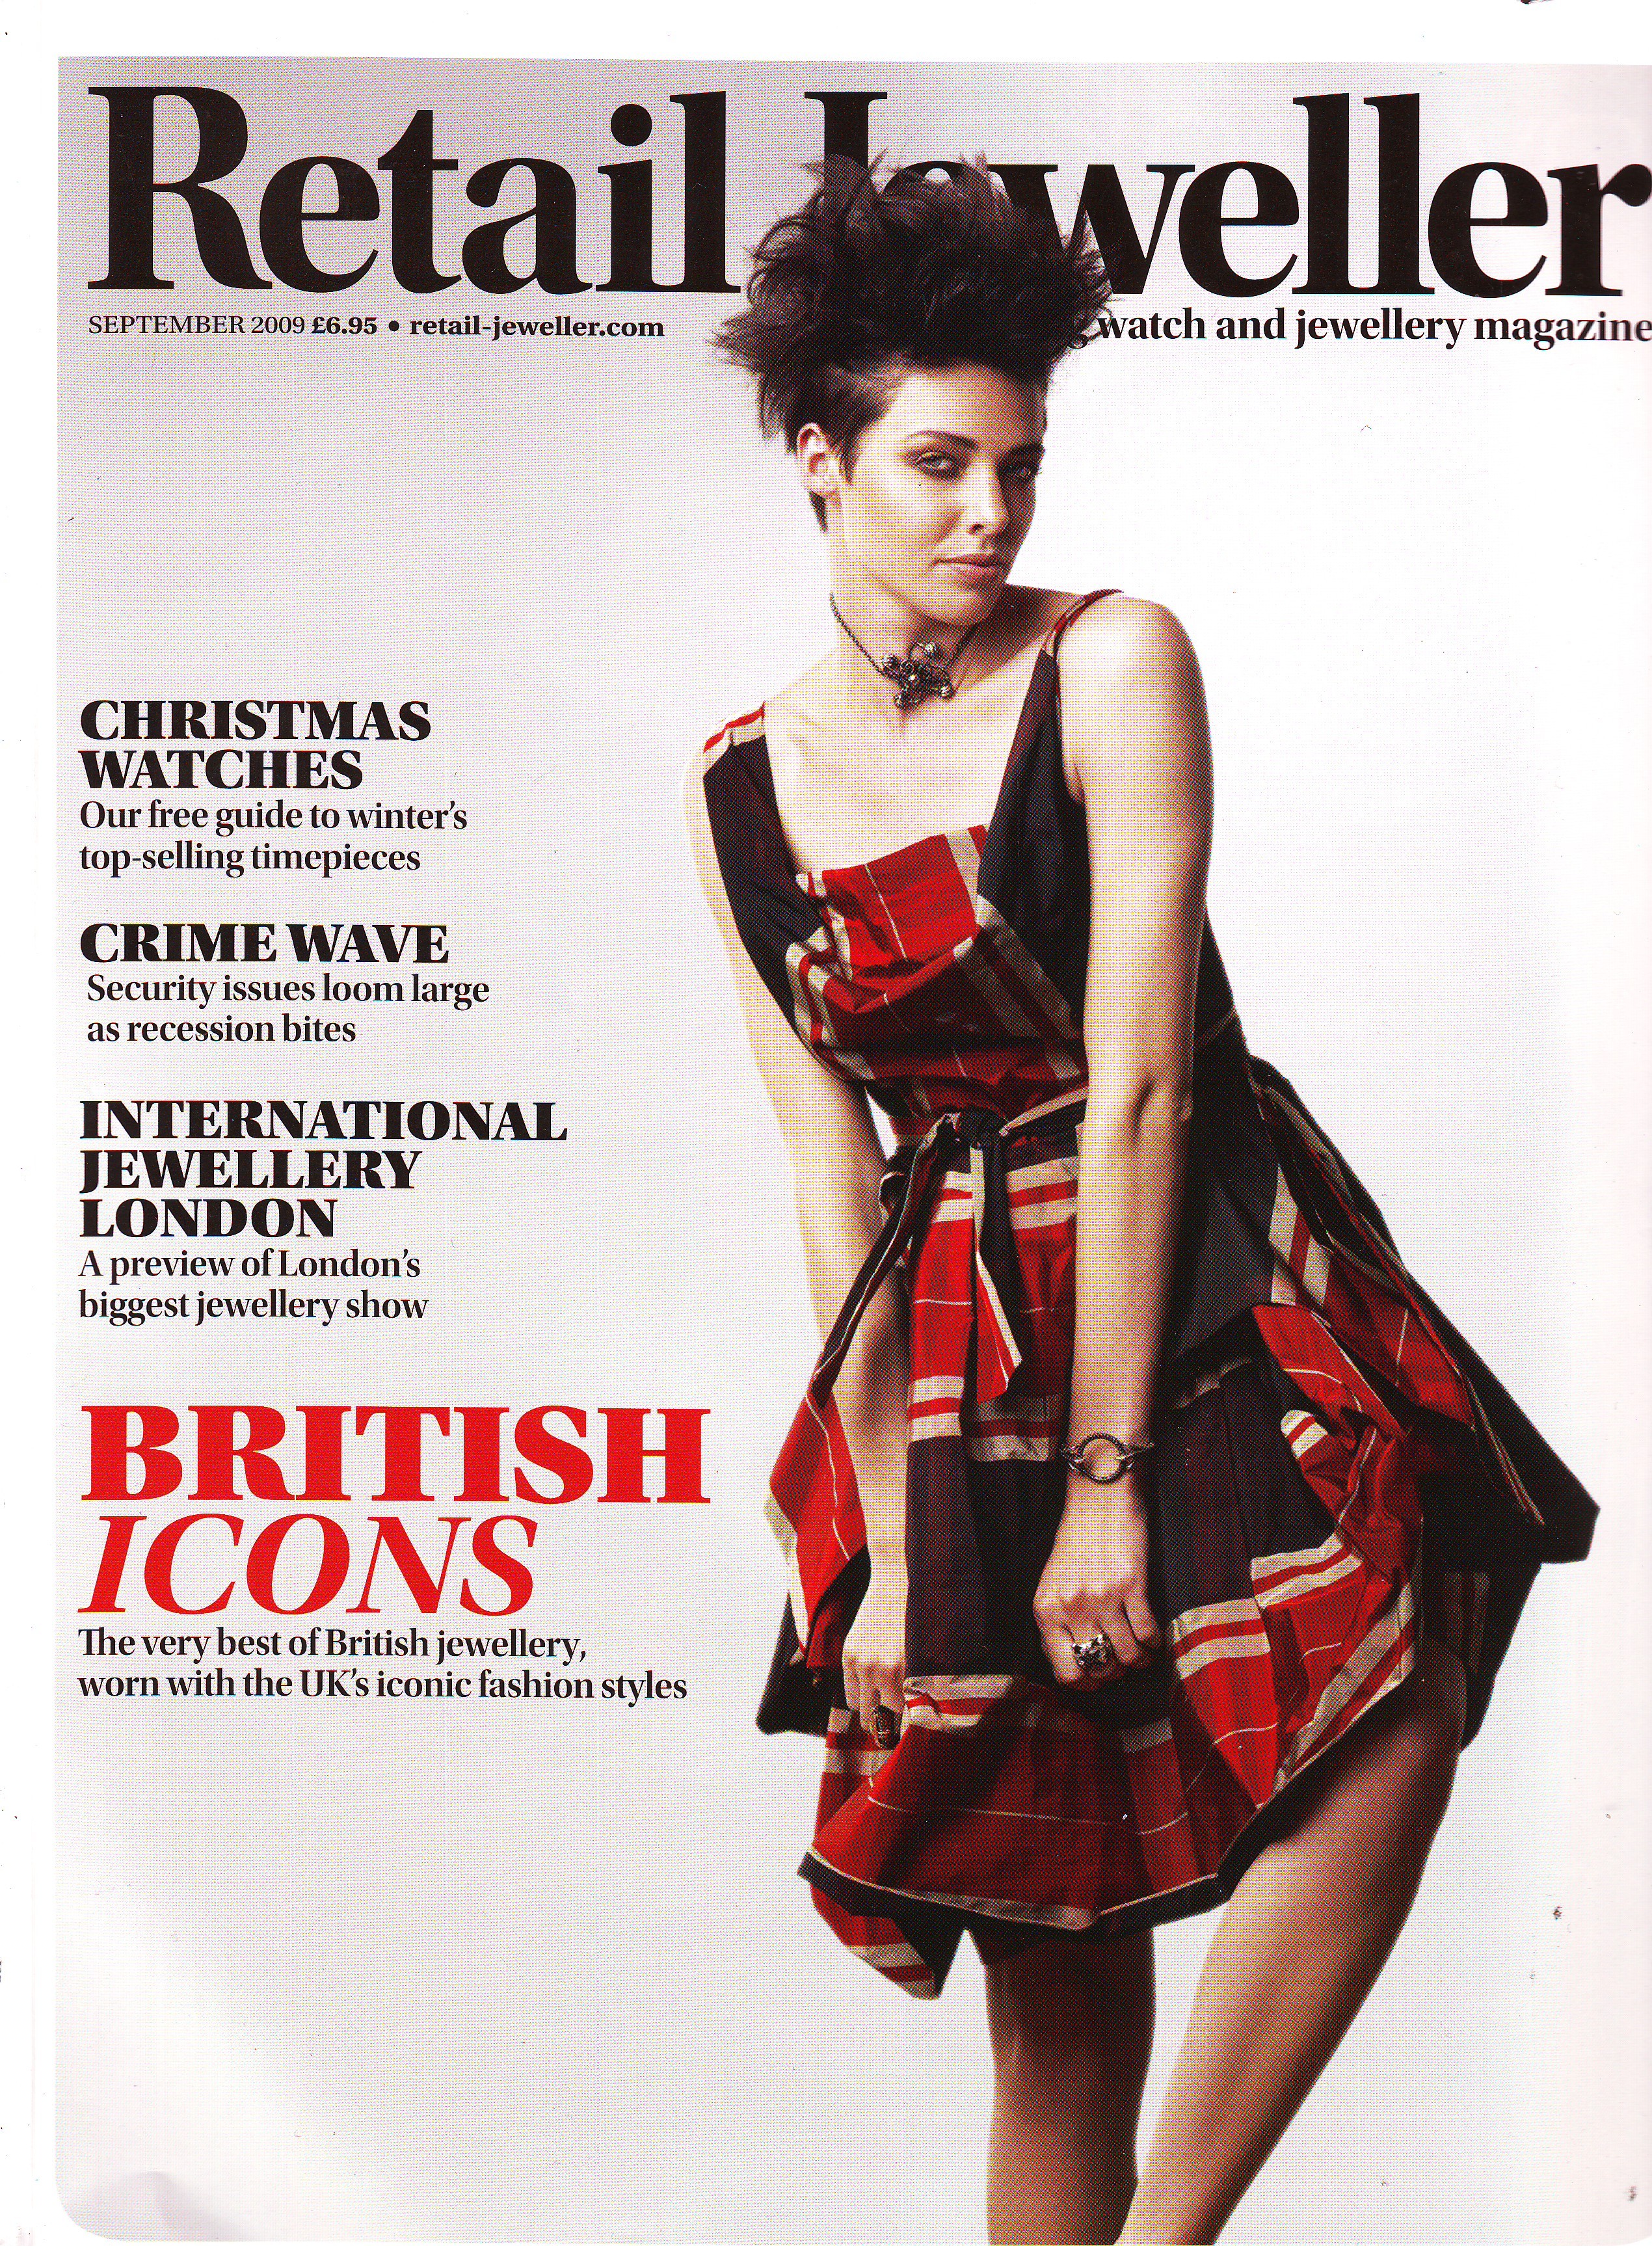 Retail Jeweller September 2009 front cover